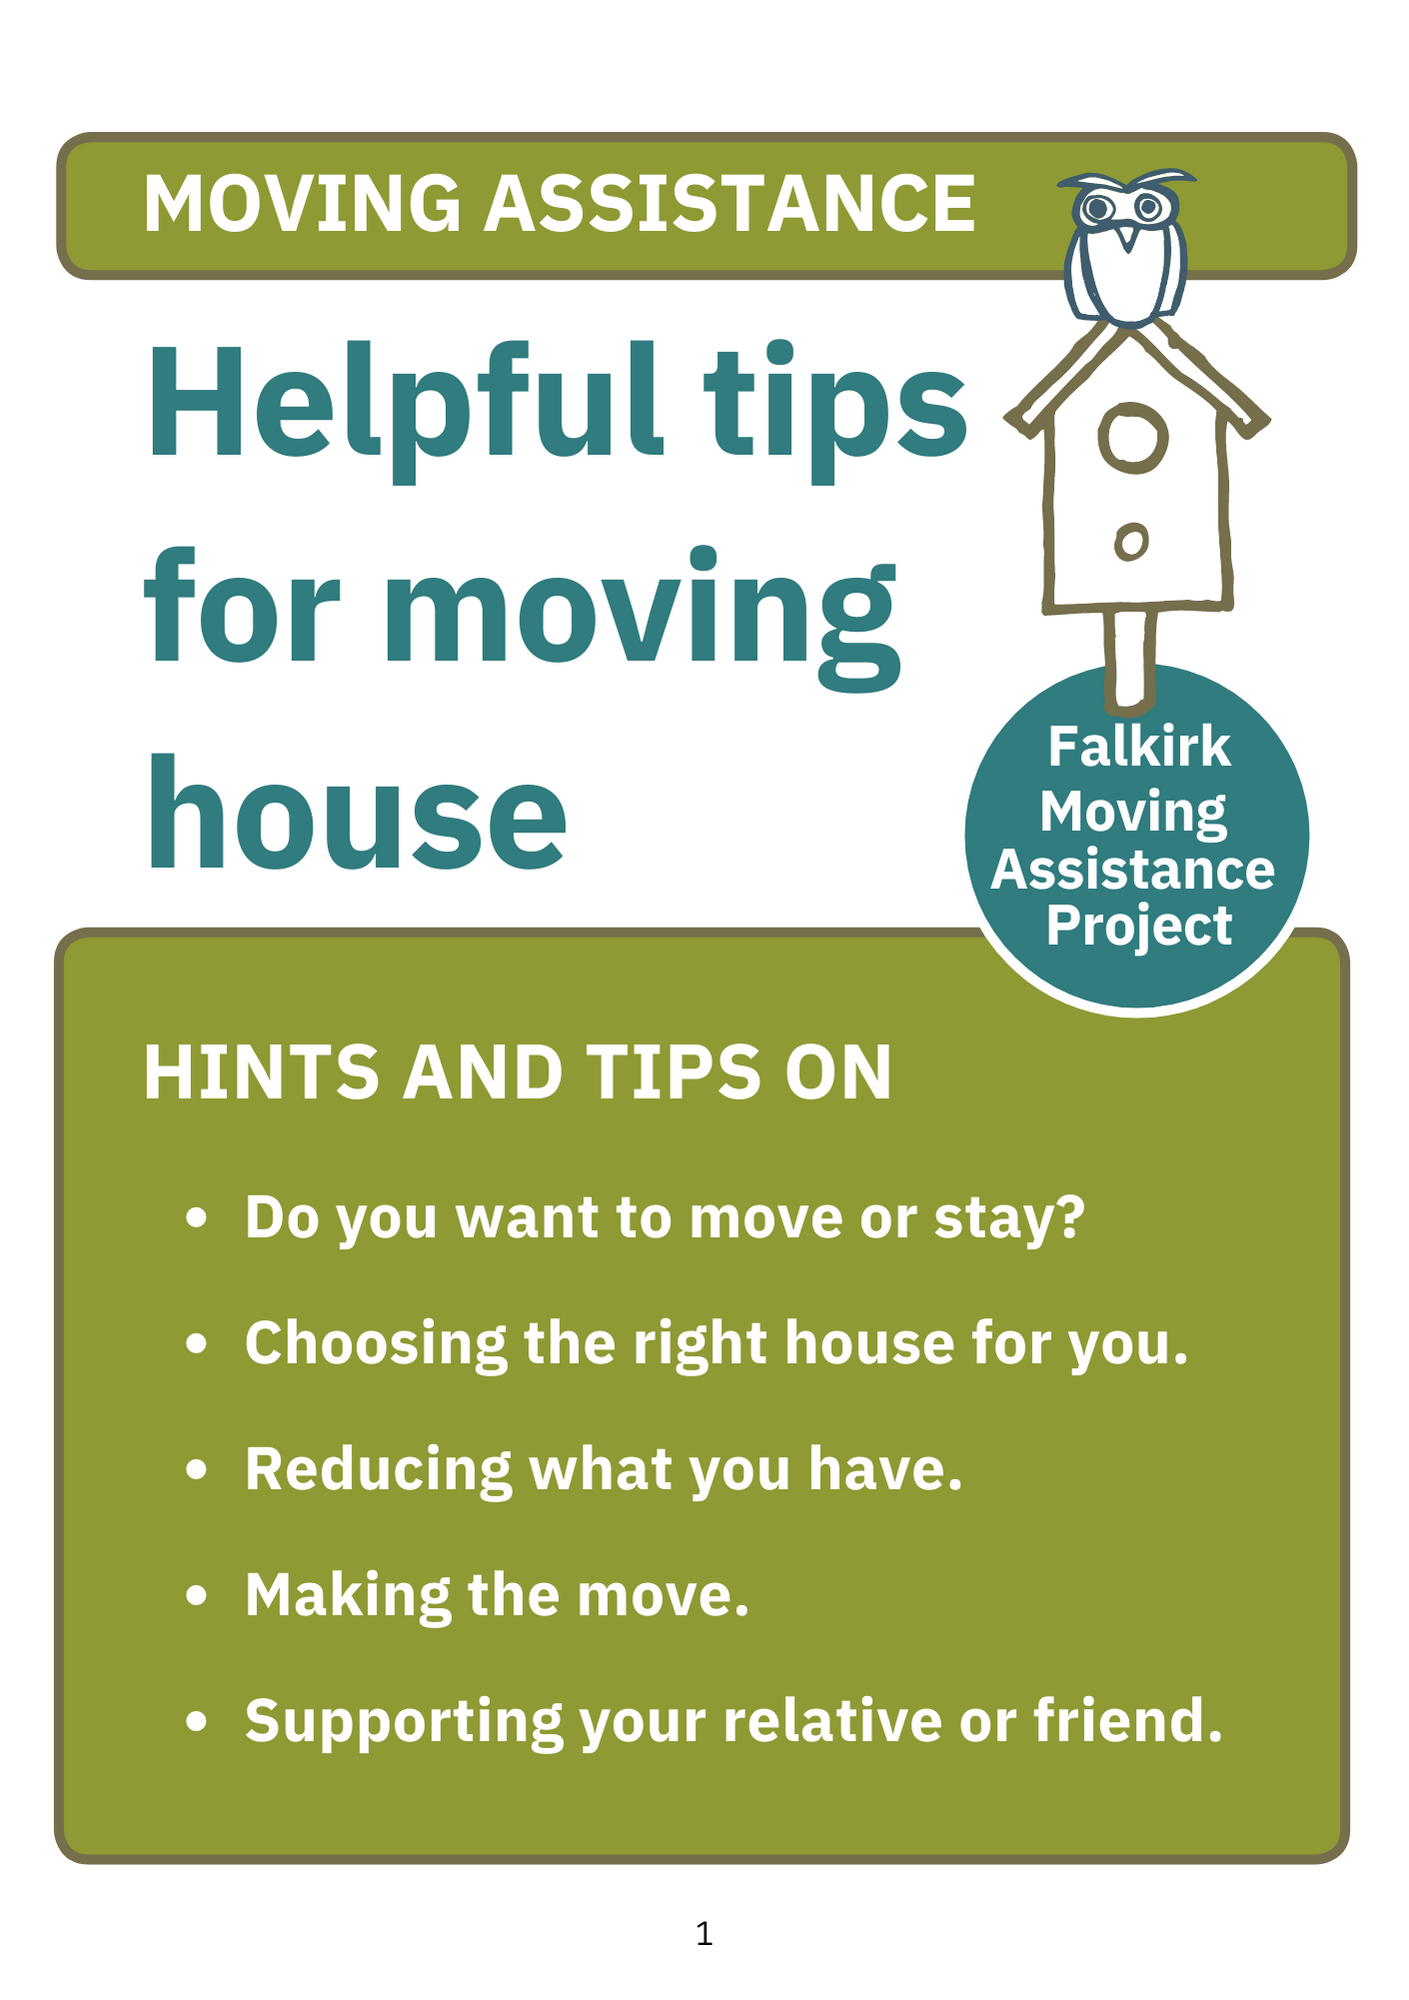 Helpful tips for moving house, including whether to move or stay, choosing the right house for you, reducing what you have, making the move, and supporting friends and family with moving